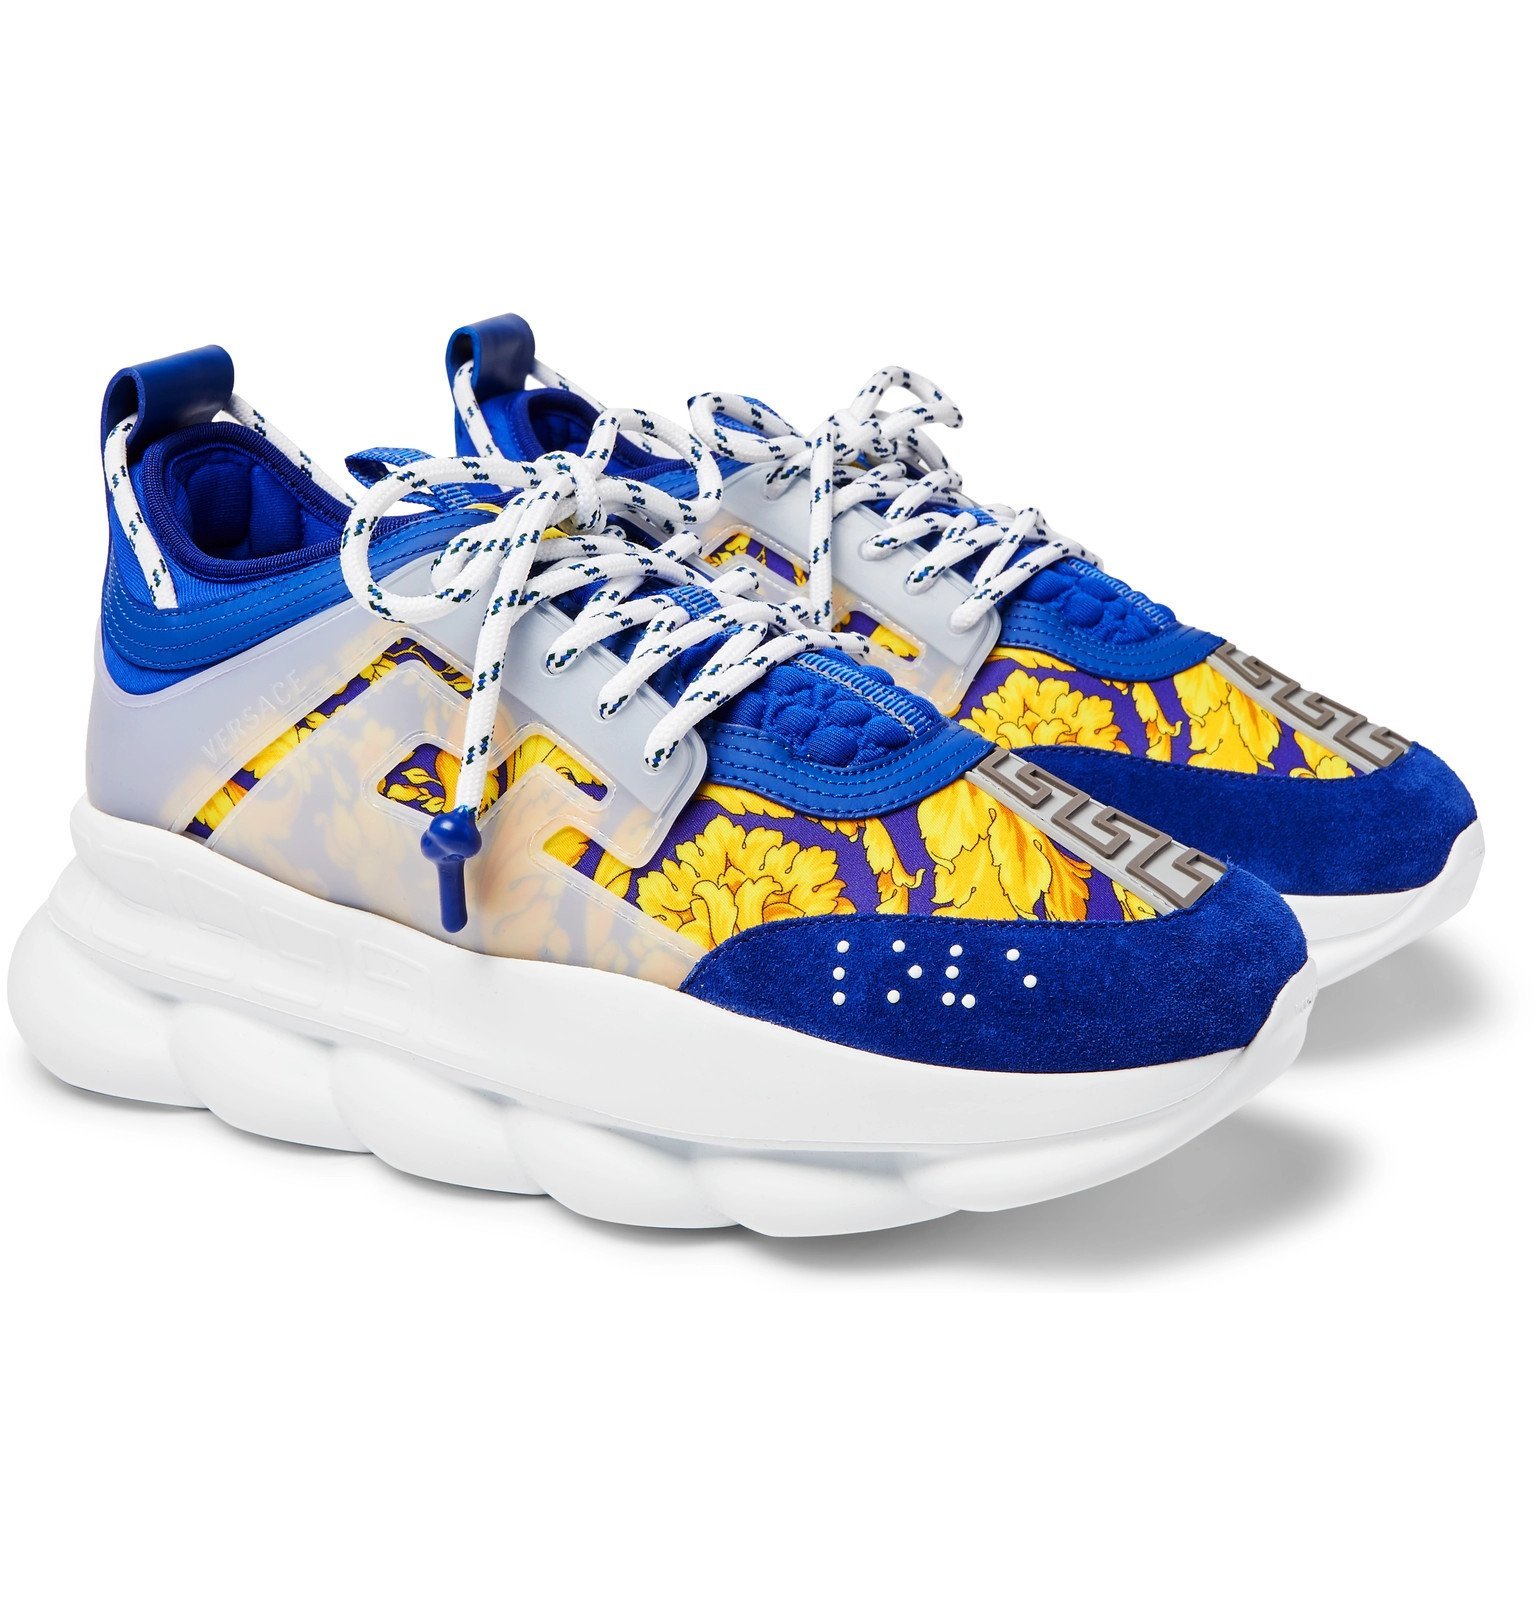 blue versace chain reaction sneakers